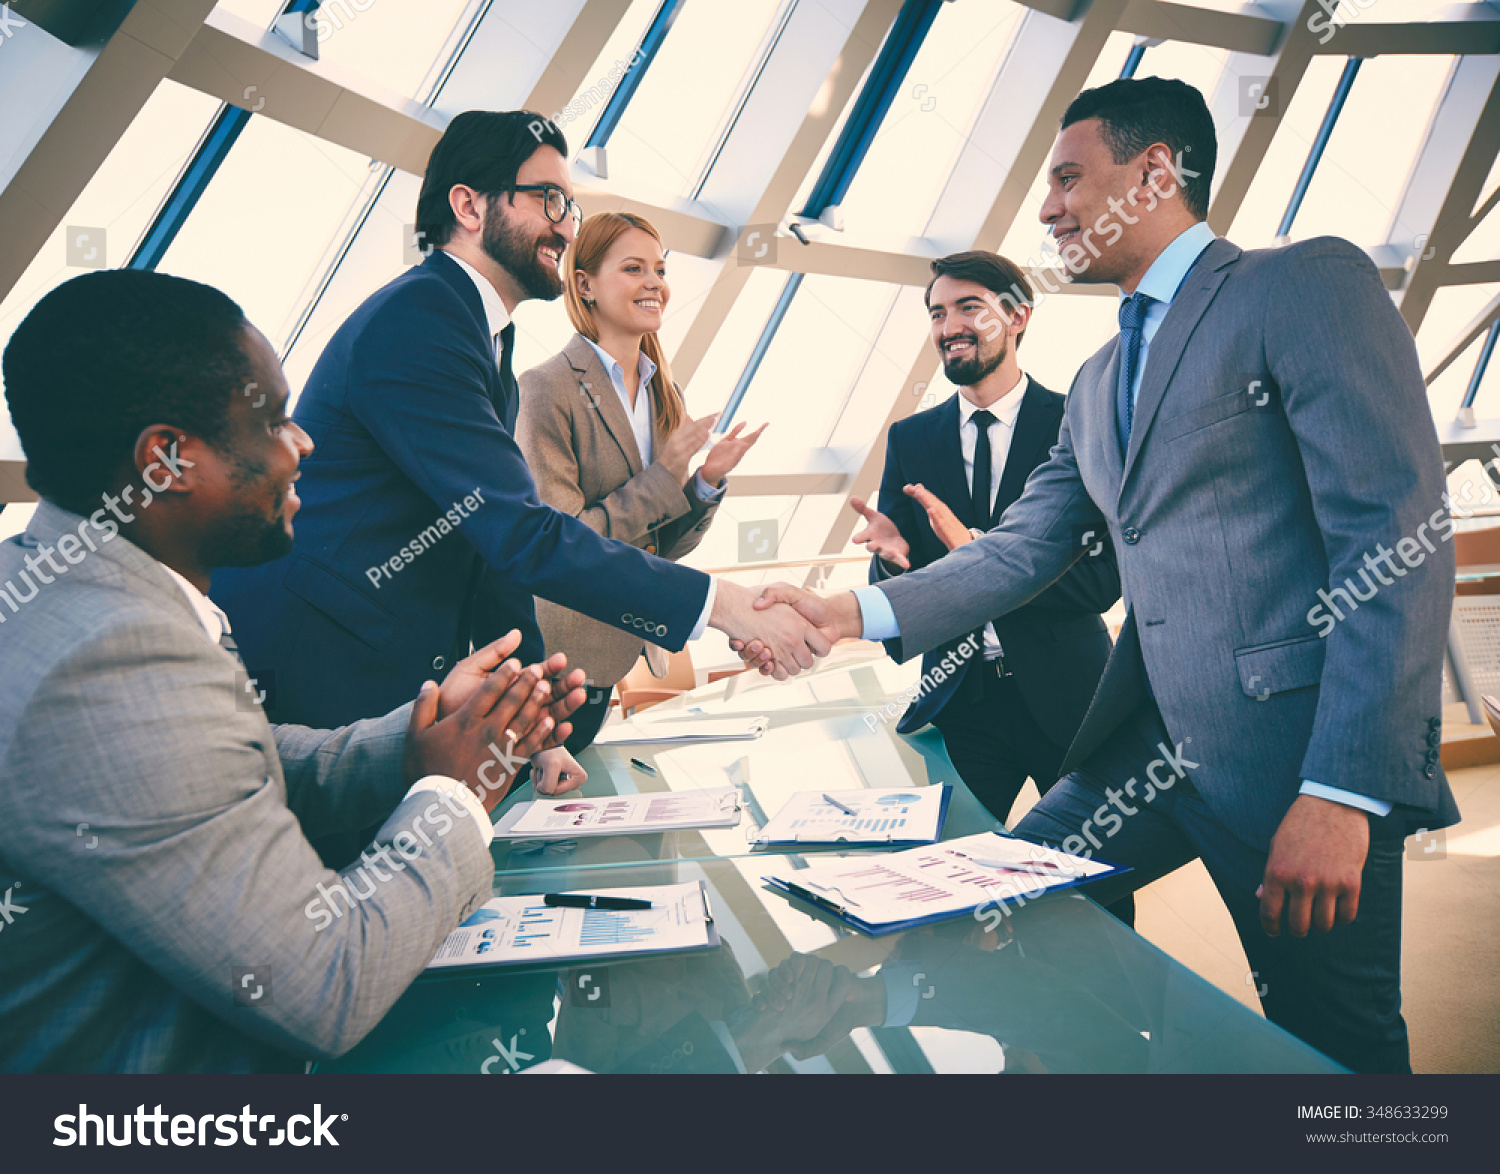 Business partners handshaking after signing contract #348633299